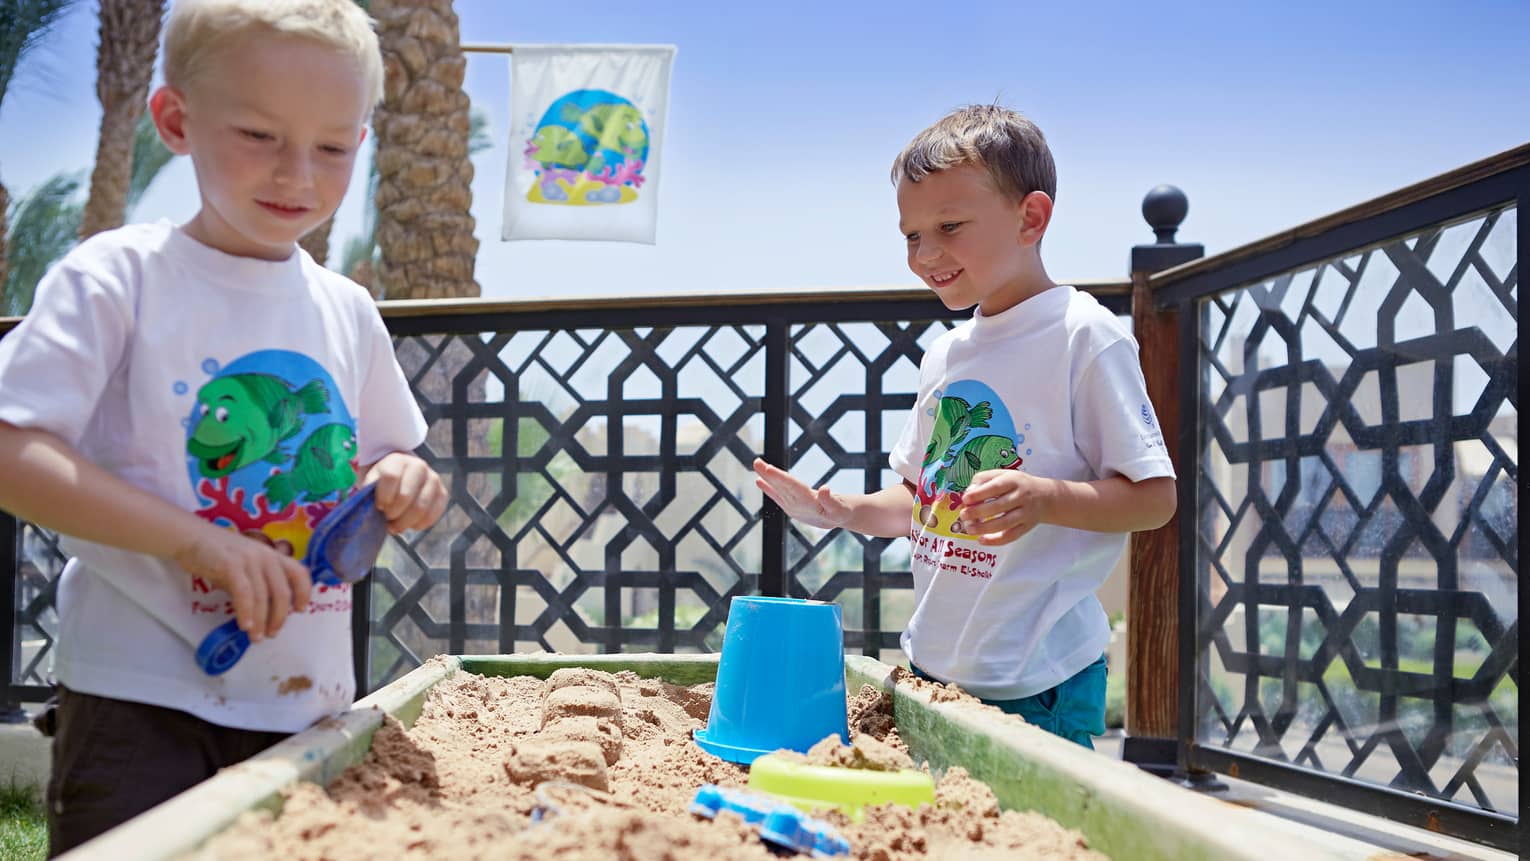 Two young boys in white T-shirts play at sand table with plastic buckets, shovels